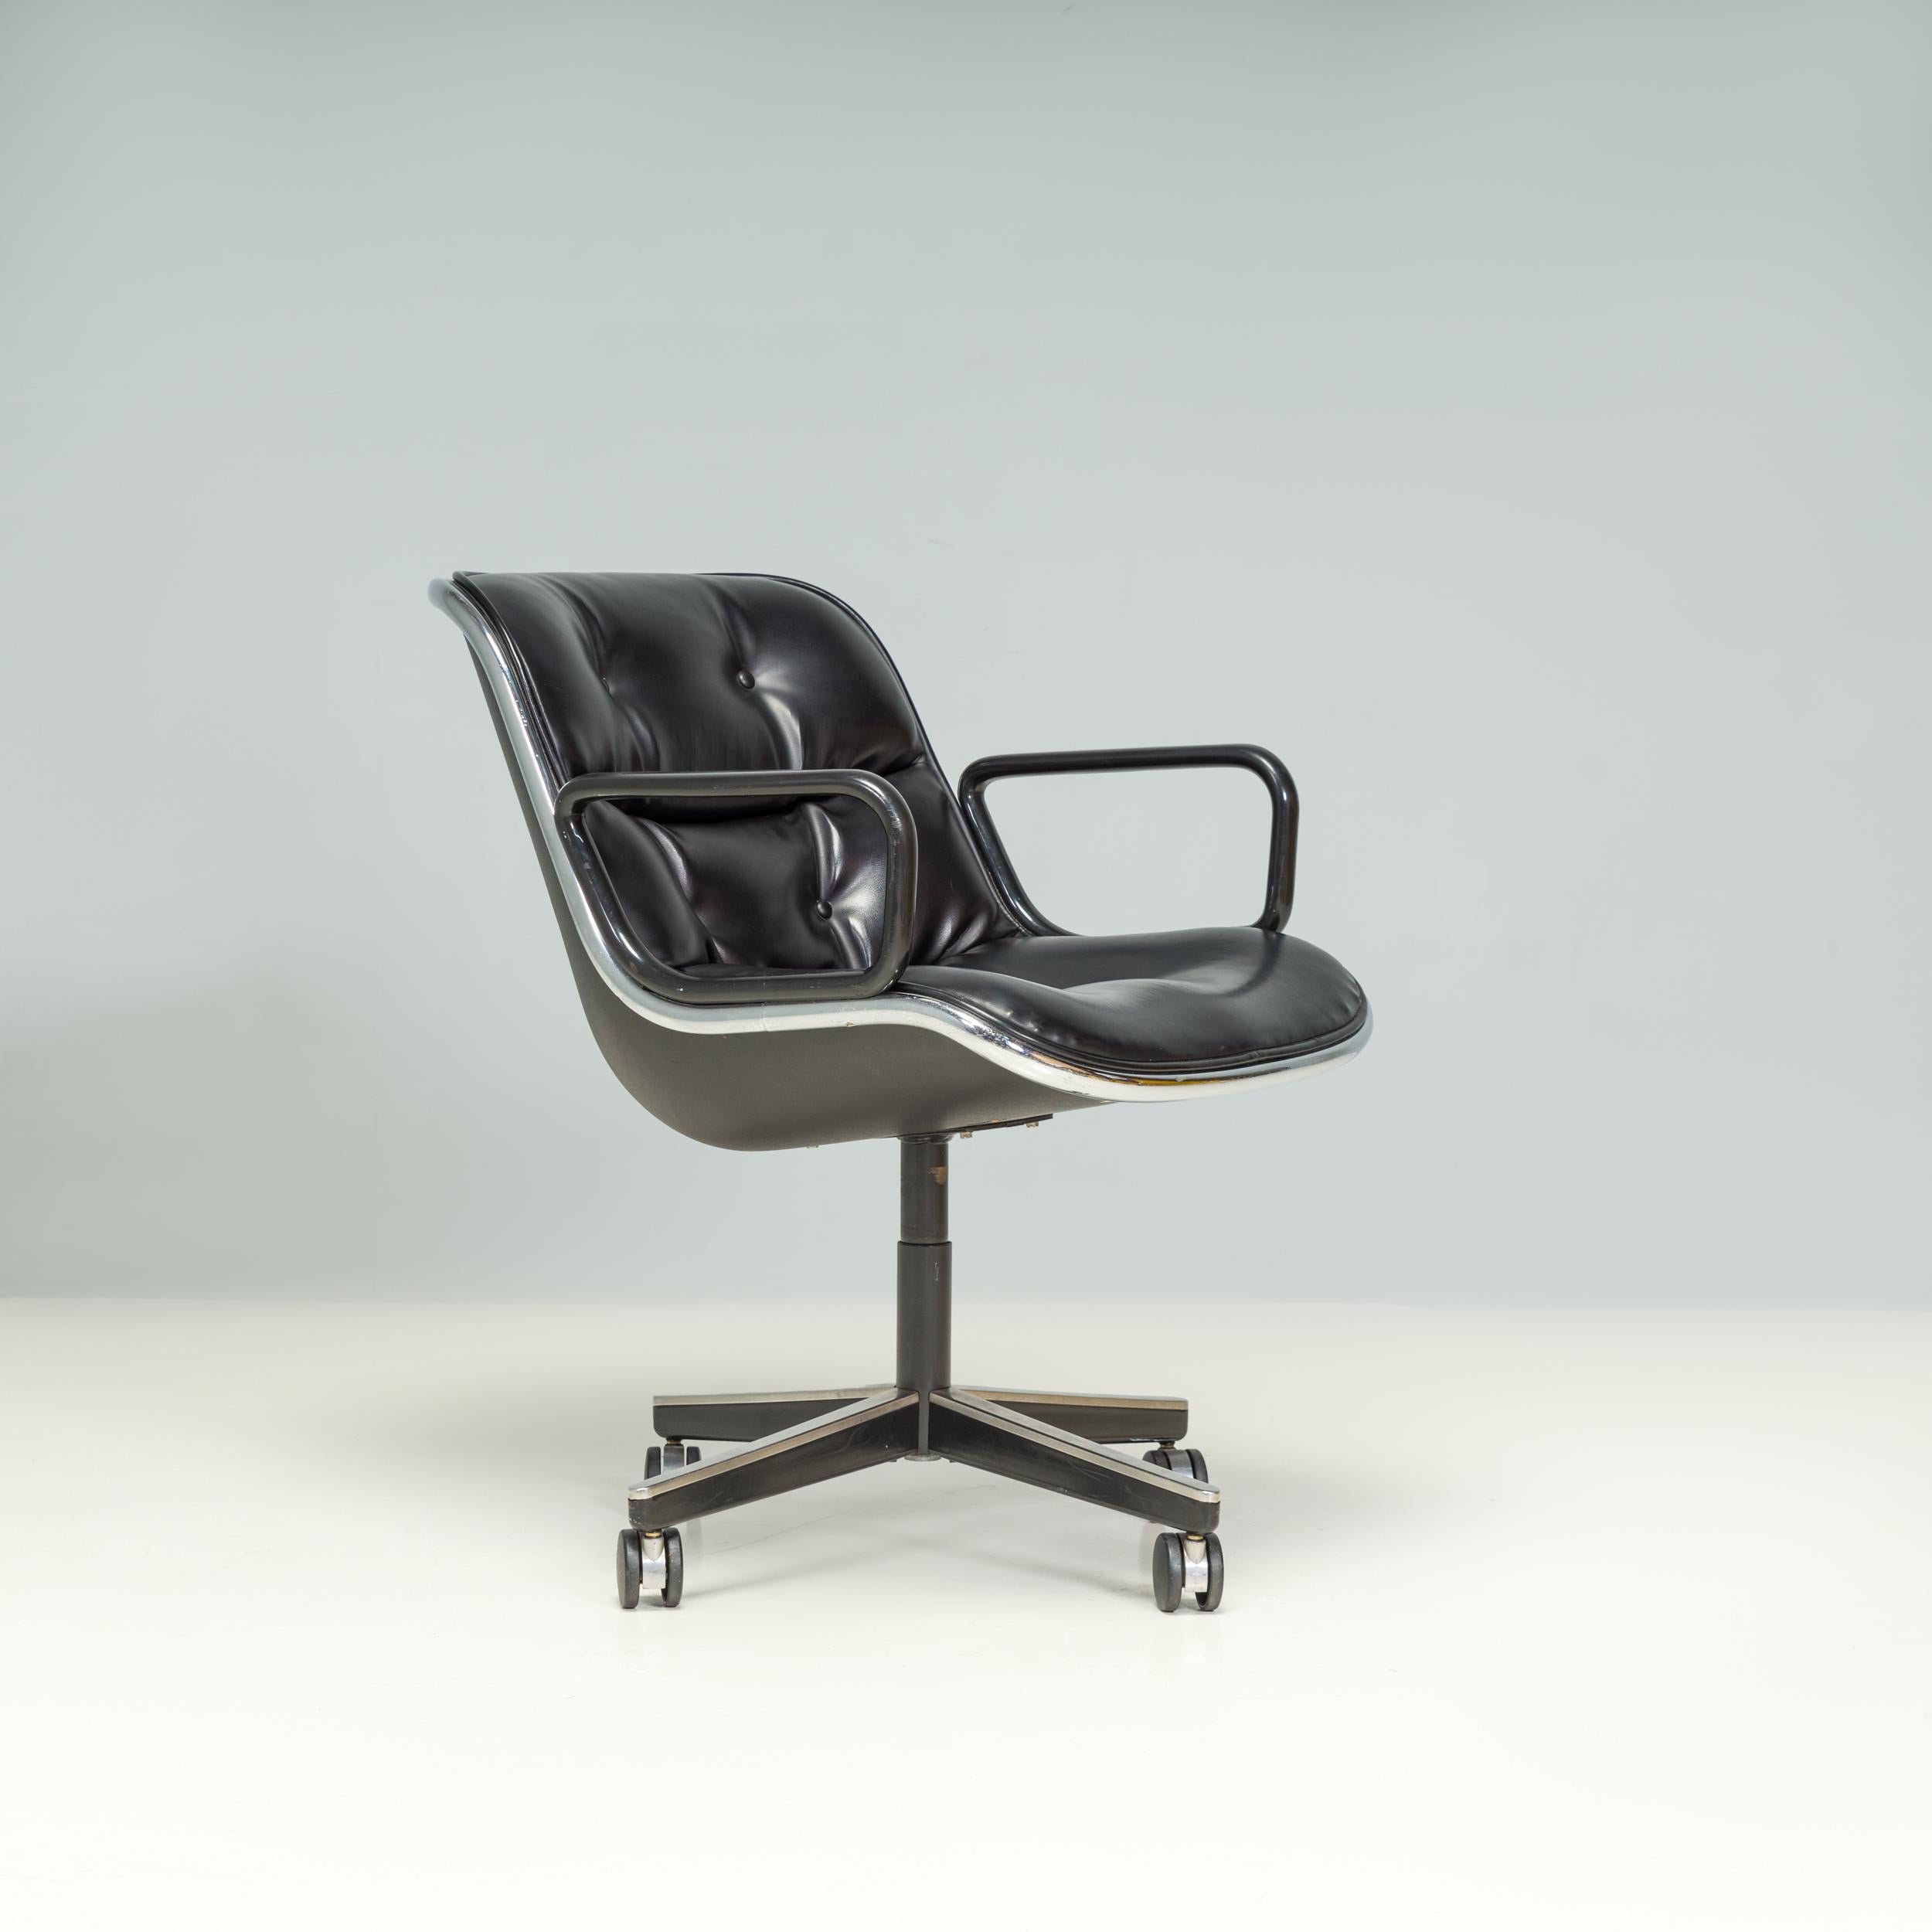 Originally designed by Charles Pollock in 1963, the Pollock executive chair has since become an iconic piece of mid century design and is still produced by Knoll today.

Constructed from a hard outer shell in black polypropylene, the chair features